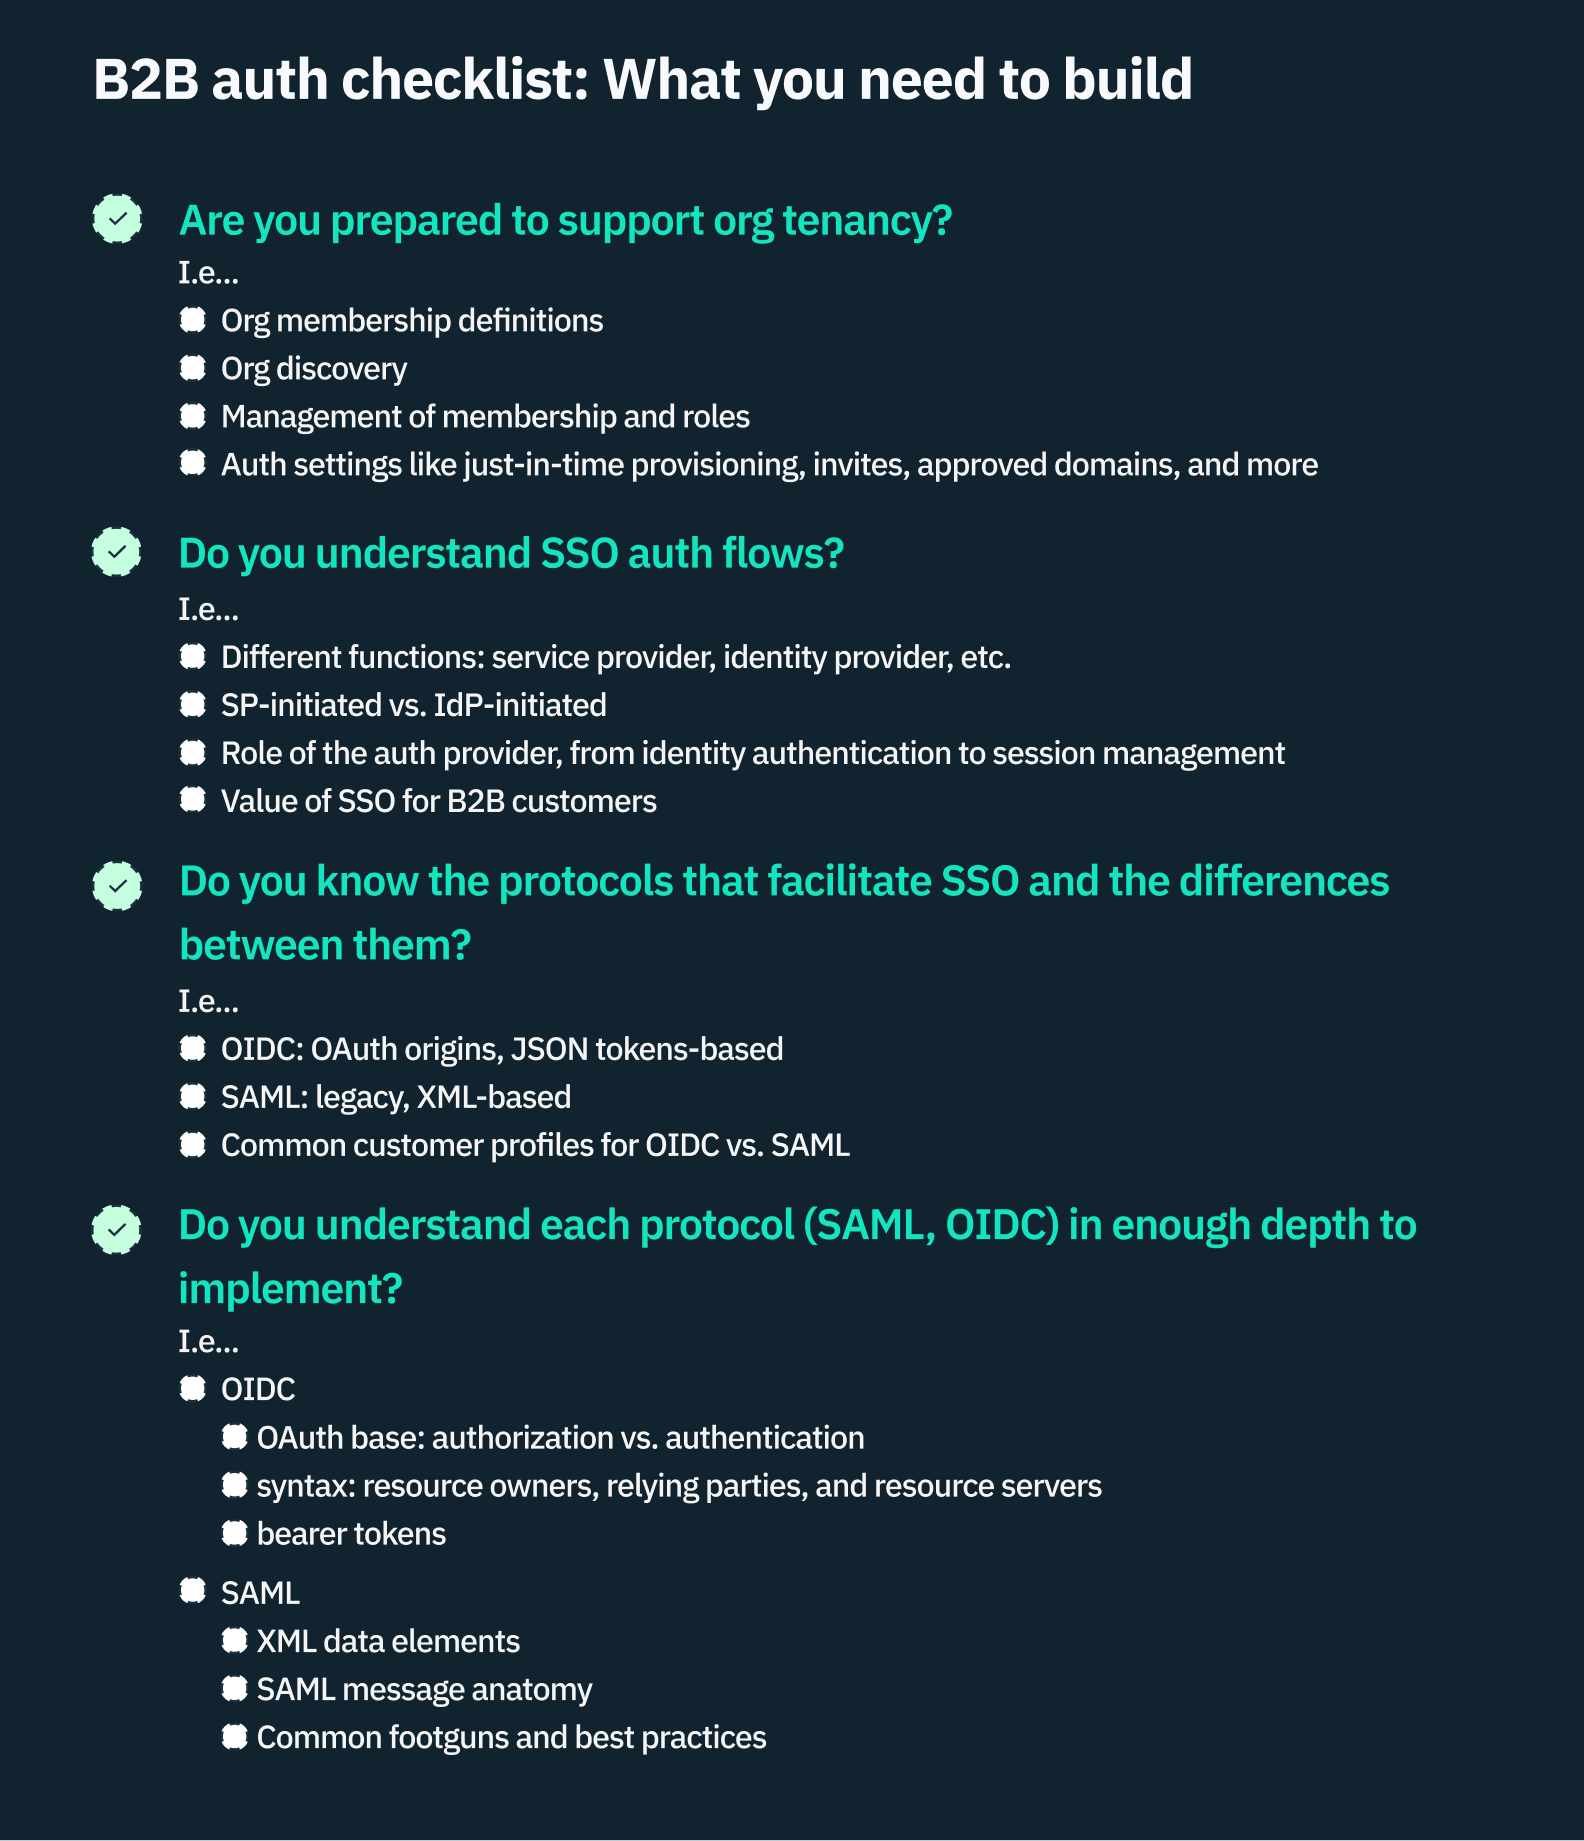 a graphical recap of the B2B auth checklist outlined above